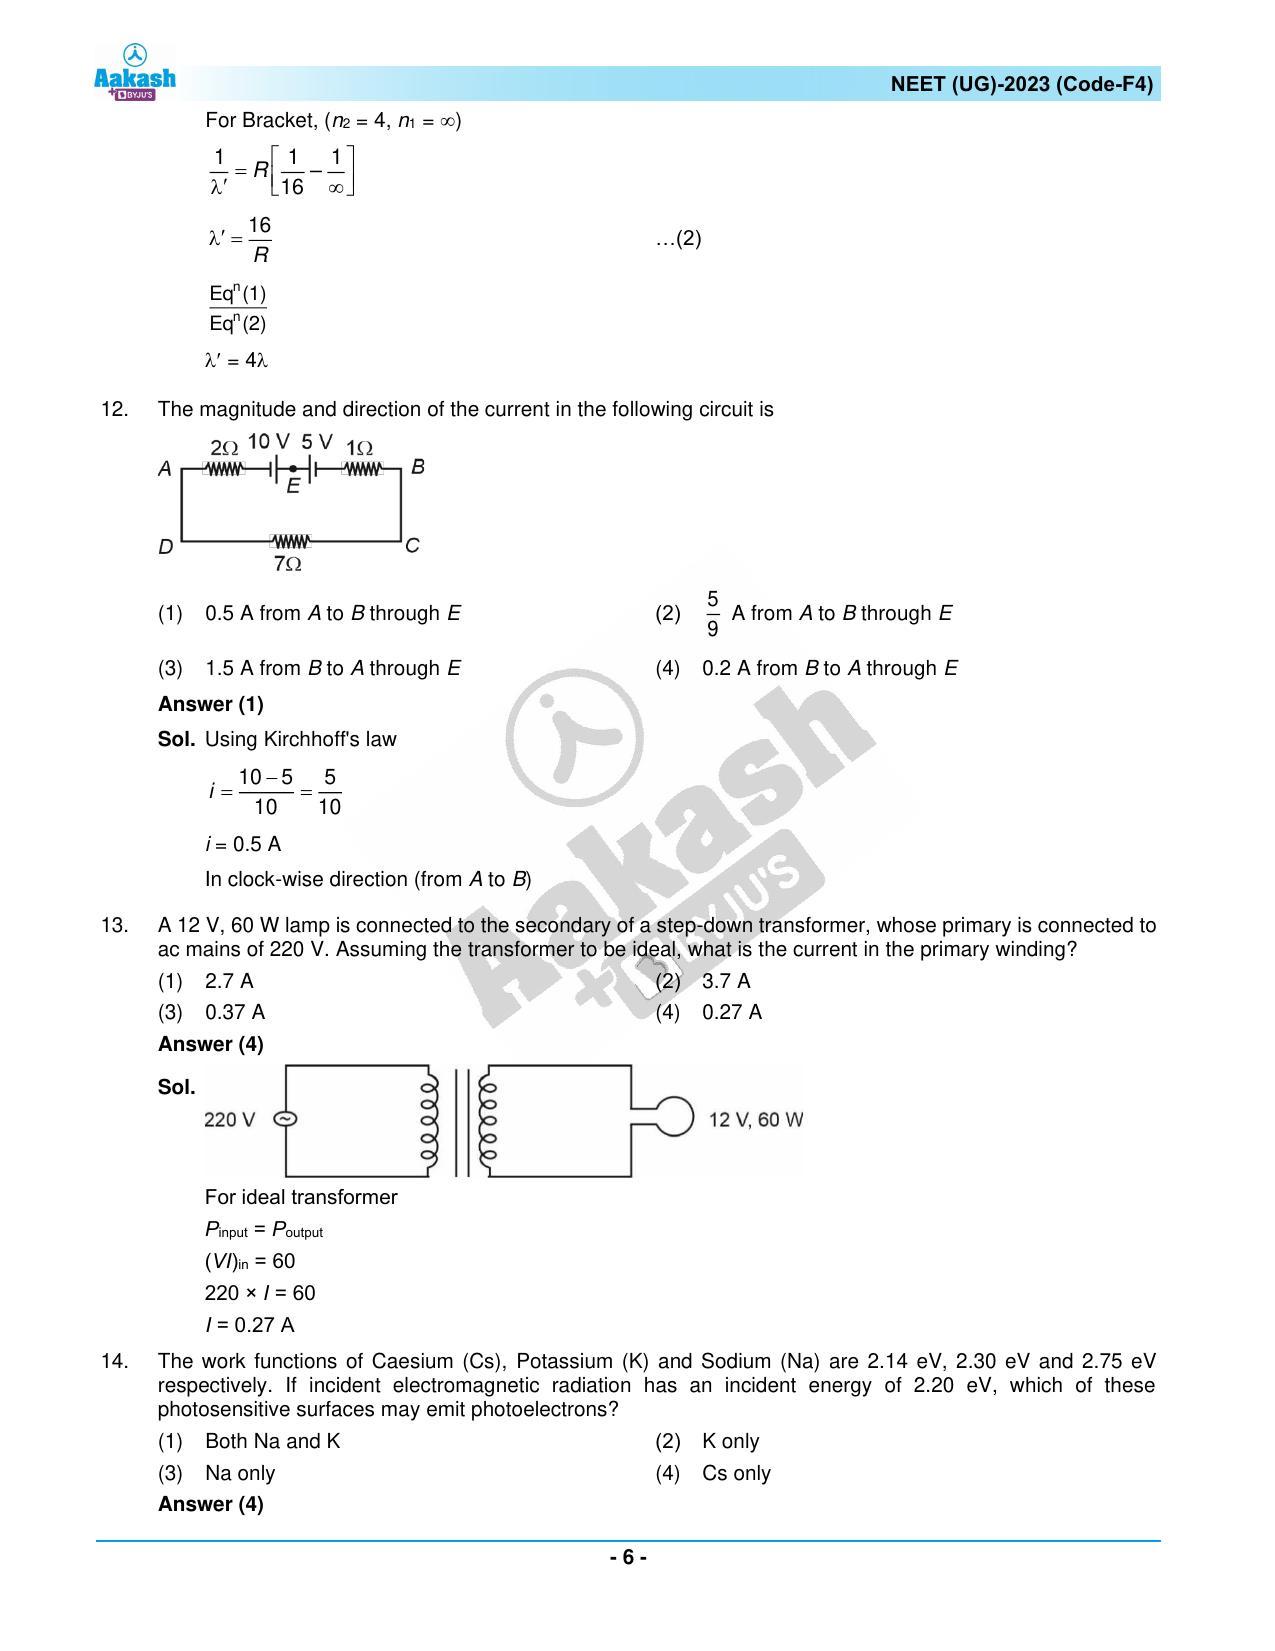 NEET 2023 Question Paper F4 - Page 6